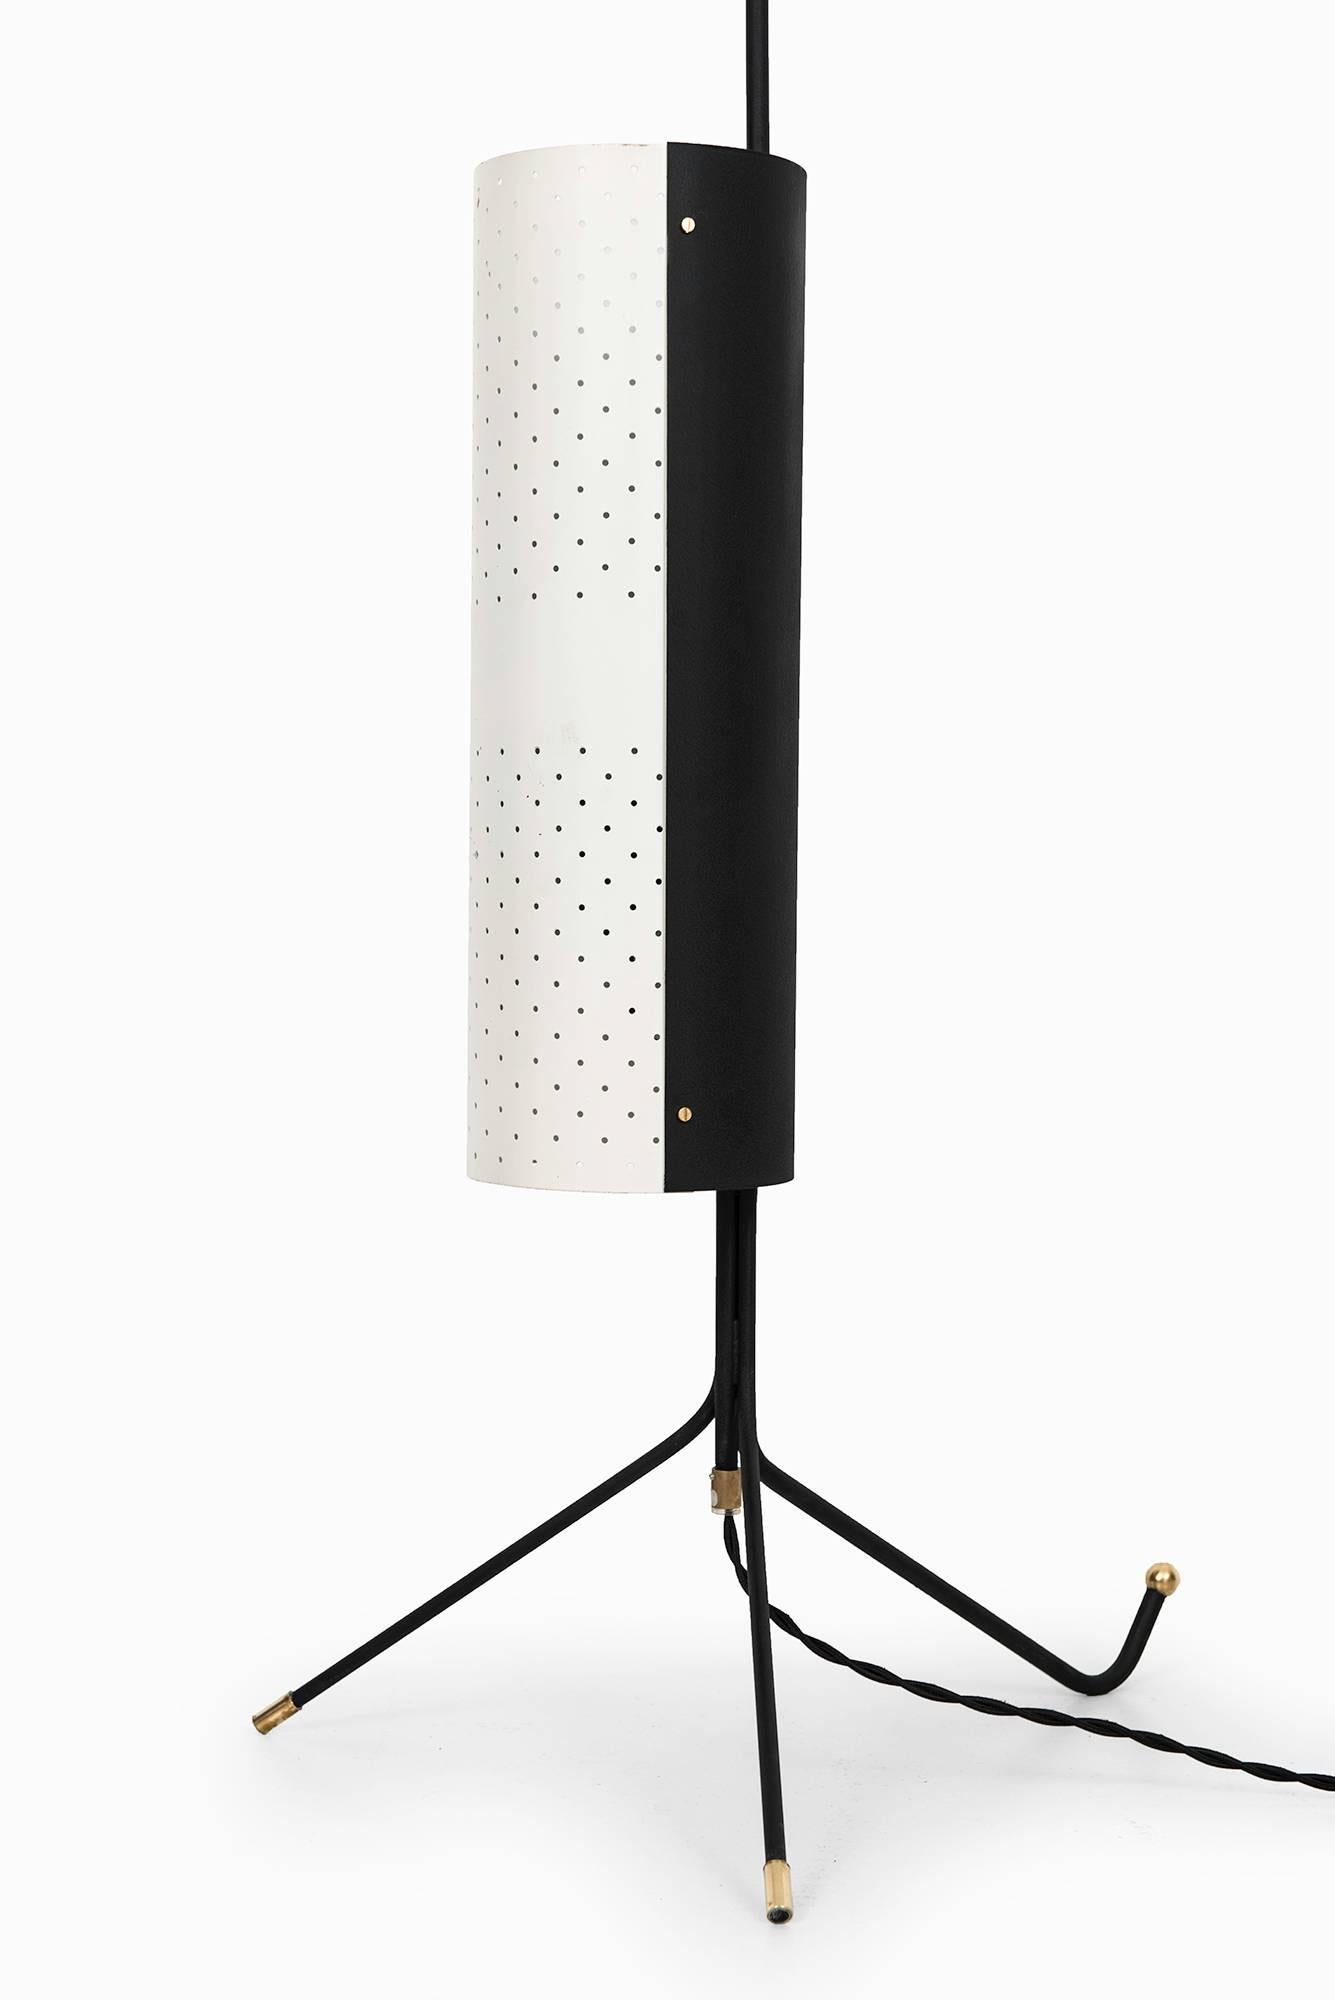 Mid-Century low floor lamp or table lamp. Produced in Sweden.